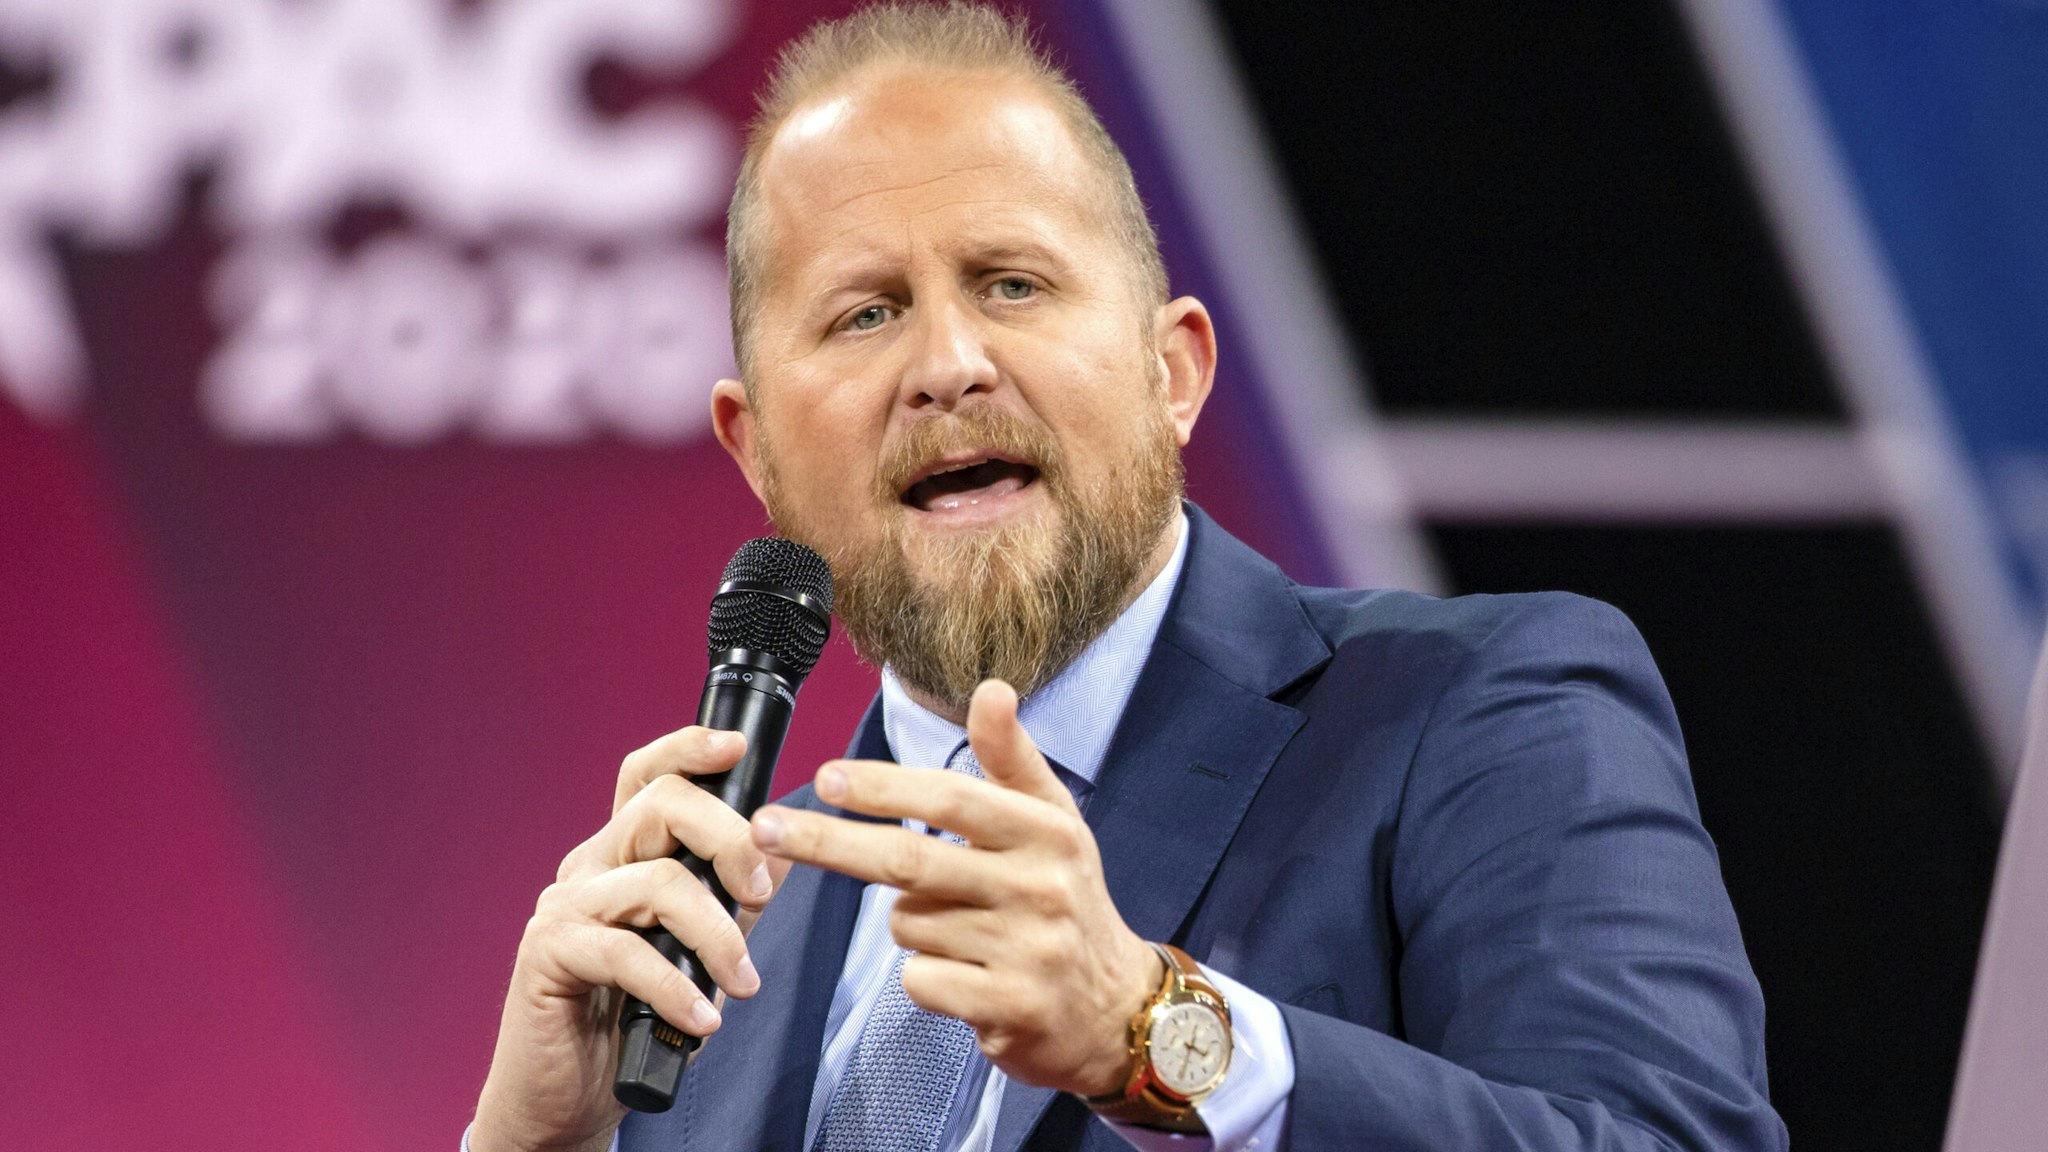 NATIONAL HARBOR, MD - FEBRUARY 28: Brad Parscale, campaign manager for Trump's 2020 reelection campaign, speaks on stage with Laura Trump, President Donald Trumps daughter in-law and member of his 2020 reelection campaign, during the Conservative Political Action Conference 2020 (CPAC) hosted by the American Conservative Union on February 28, 2020 in National Harbor, MD.